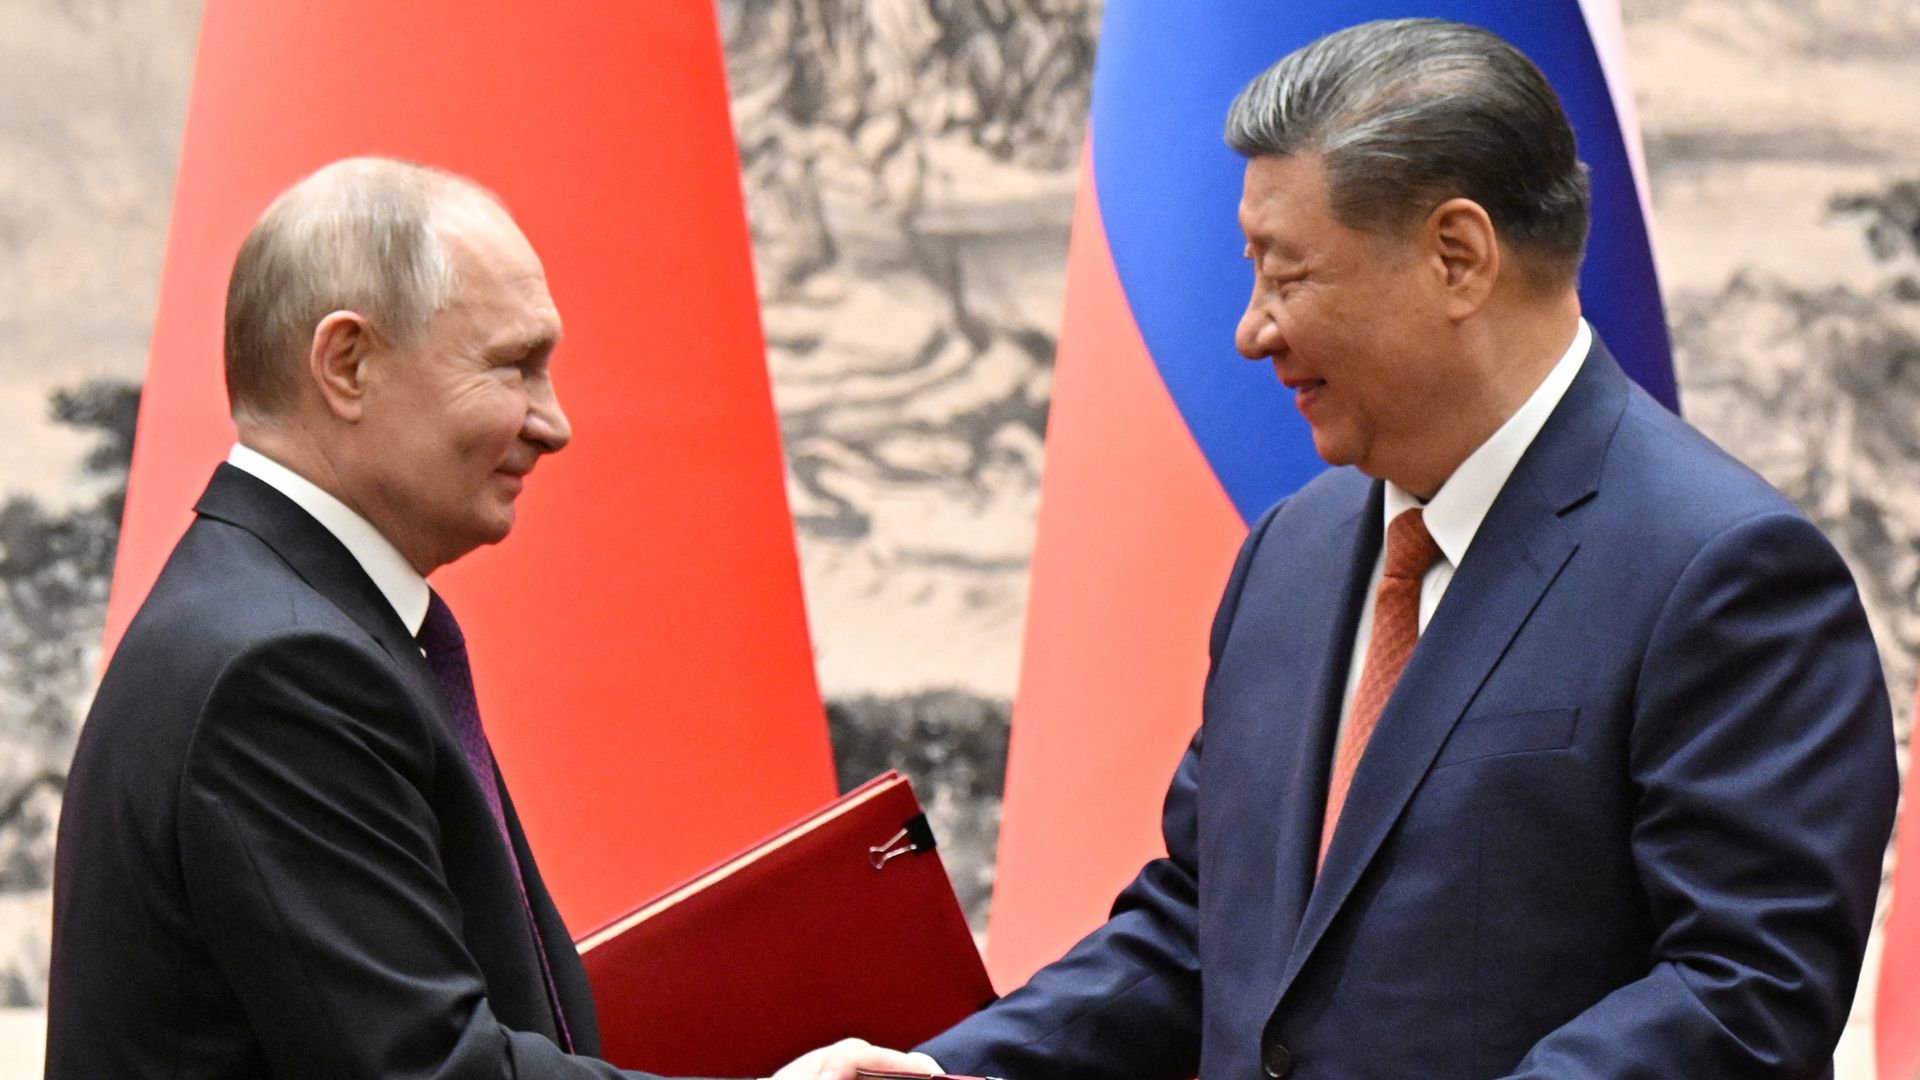 Putin thanks Xi for his efforts to resolve Ukraine conflict as the ‘good friends’ bolster China-Russia ties